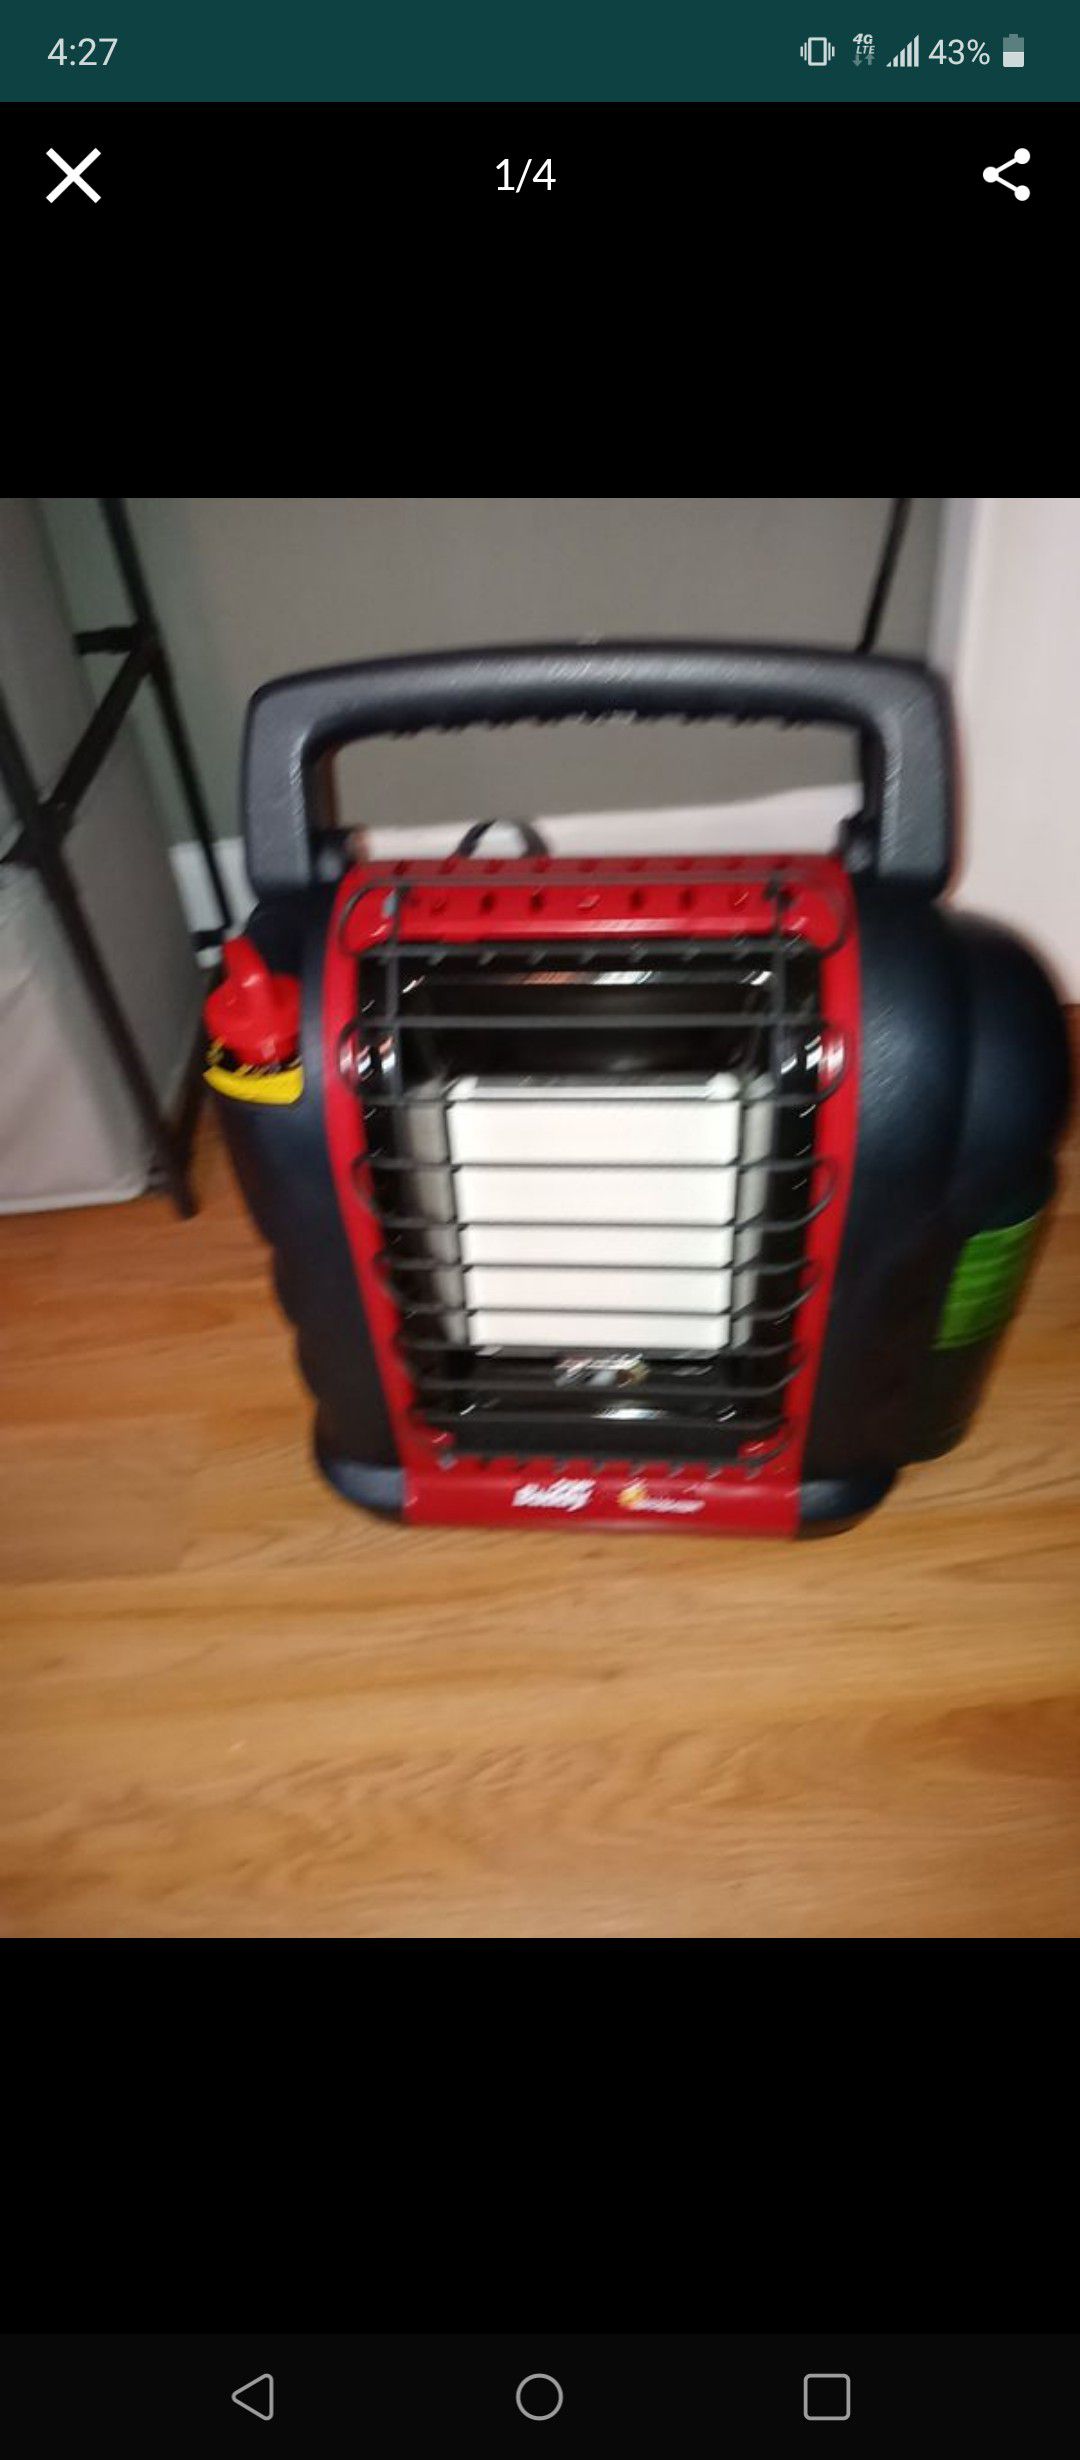 Mr heater Buddy the most purchased small heater out there